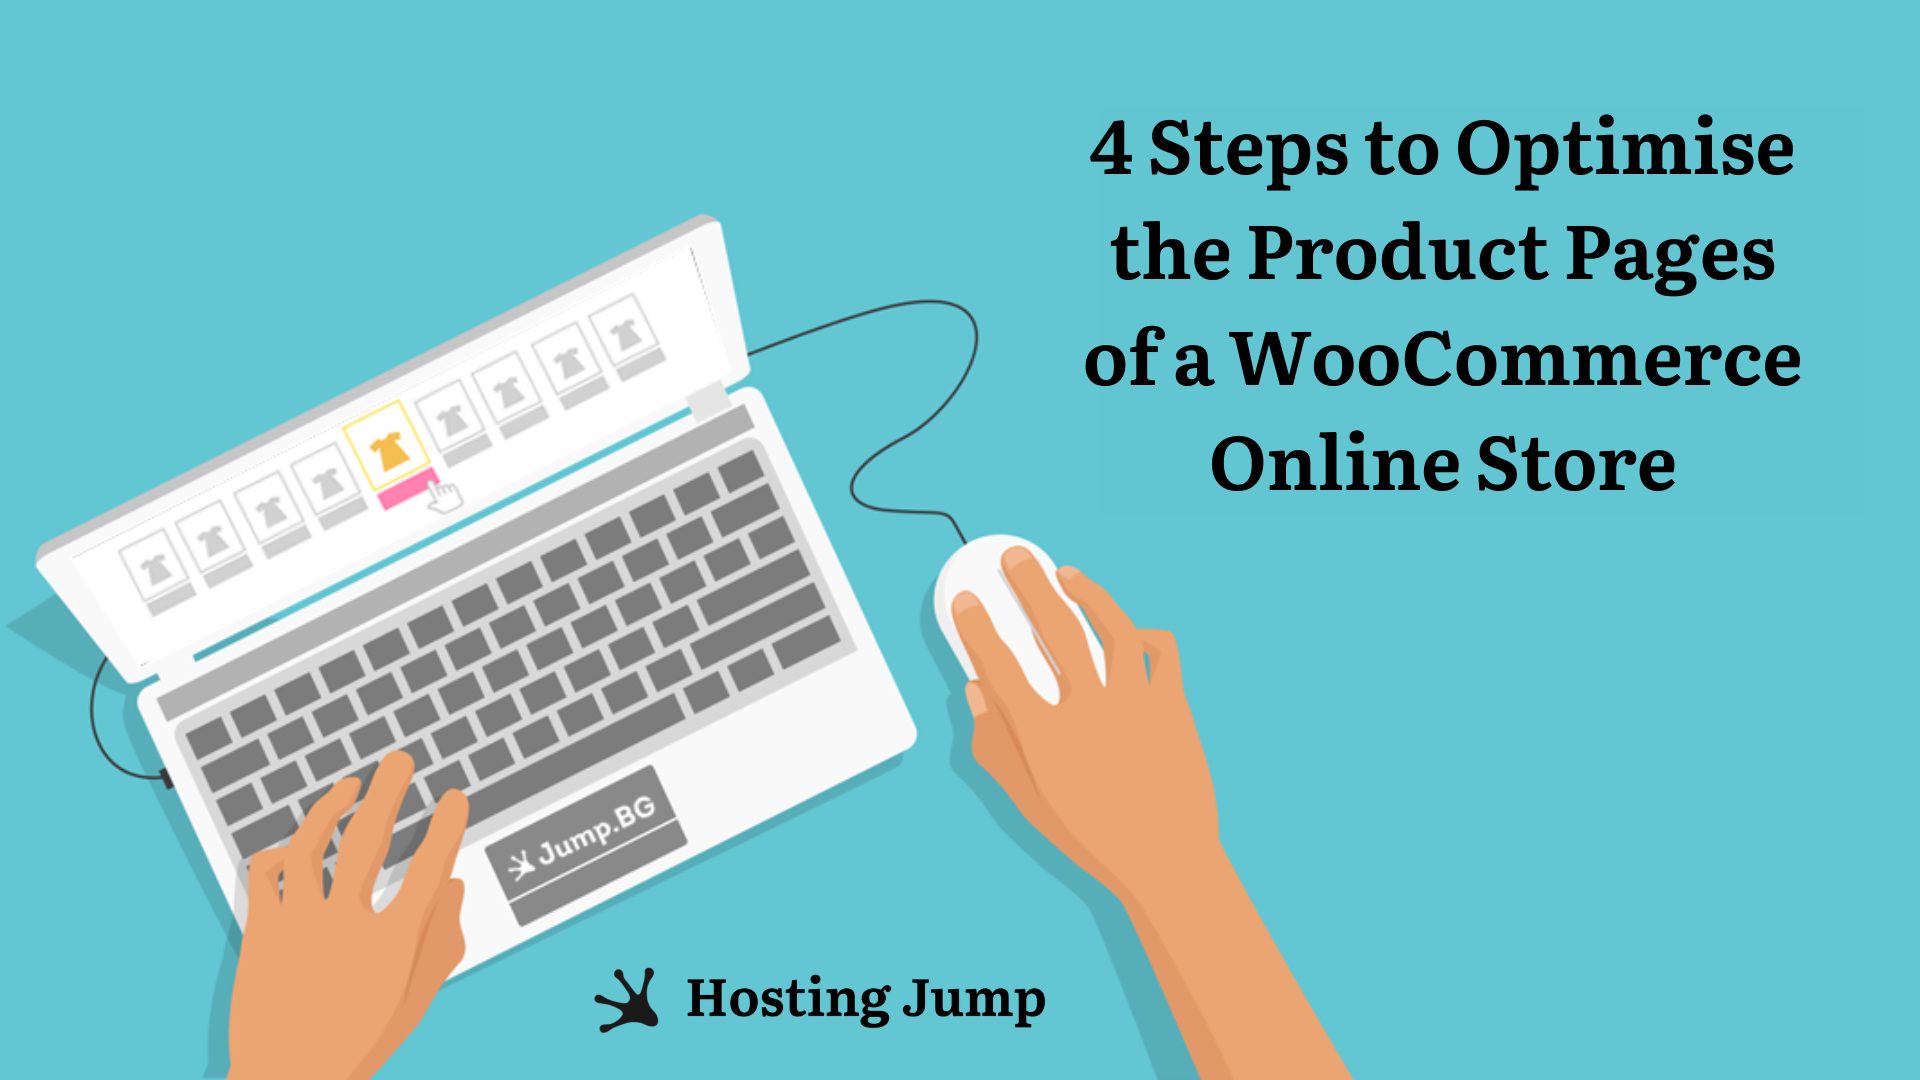 4 Steps to Optimize the Product Pages of a WooCommerce Online Store